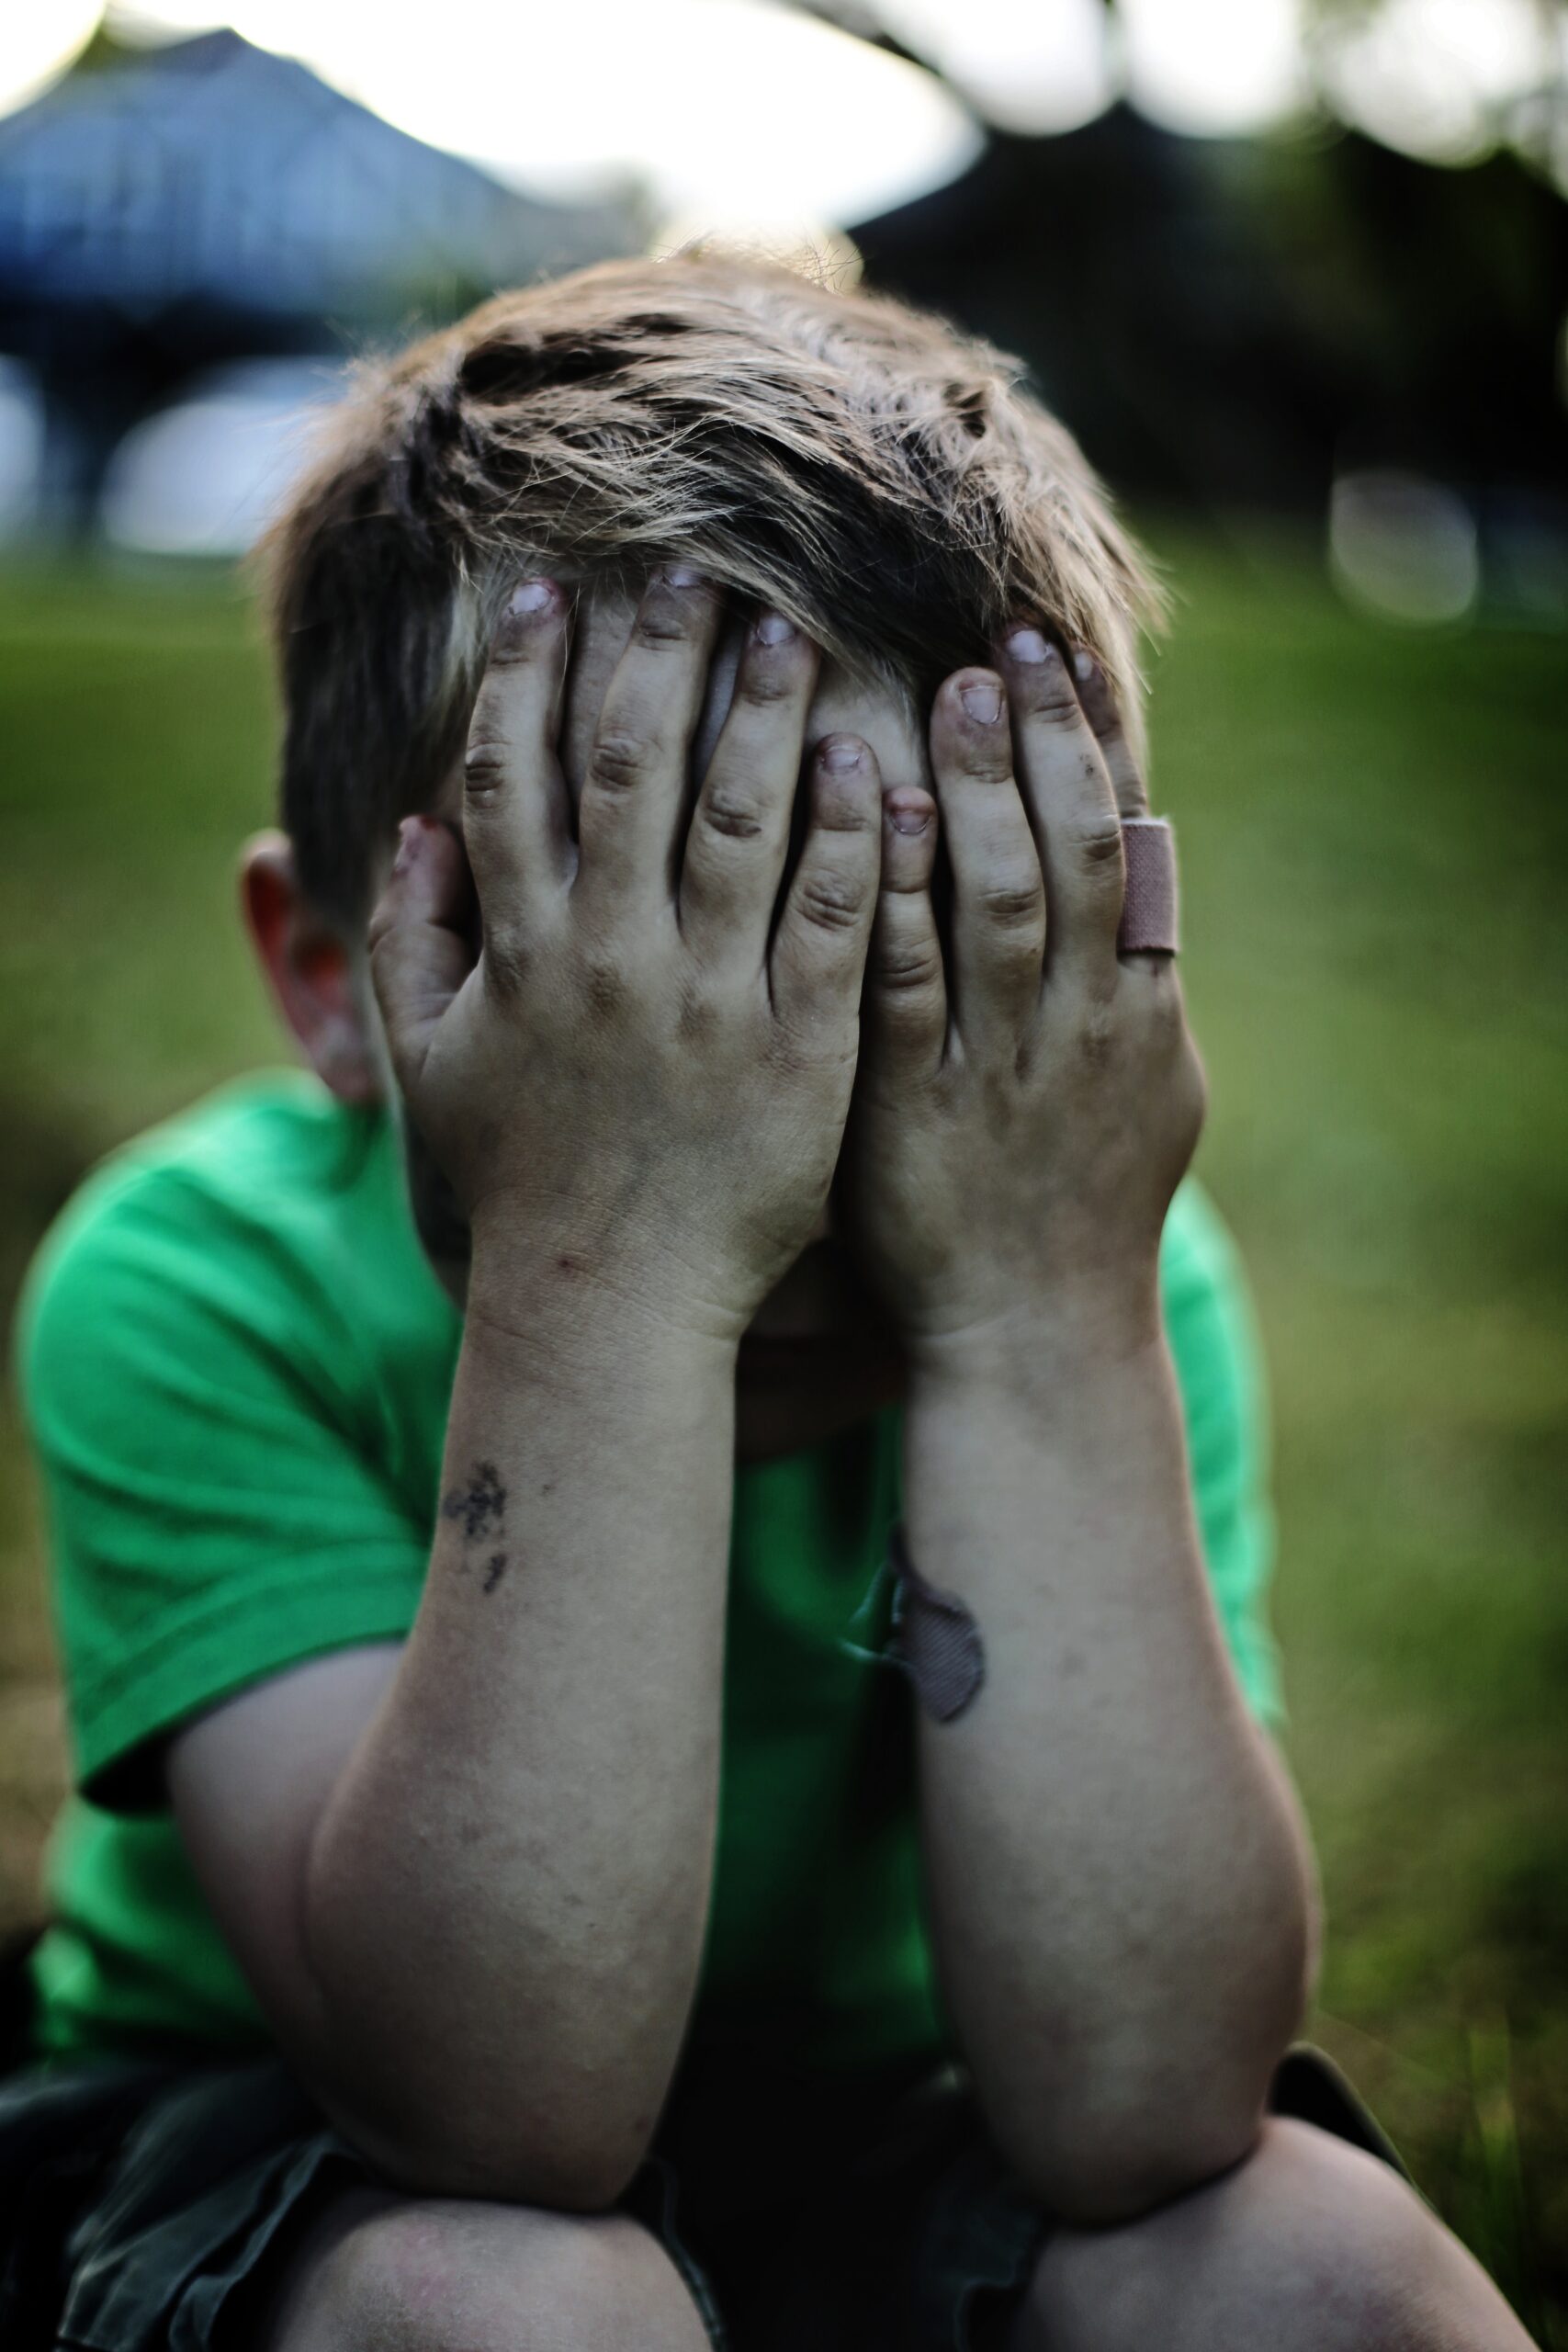 Signs of children's Mental Health Problems